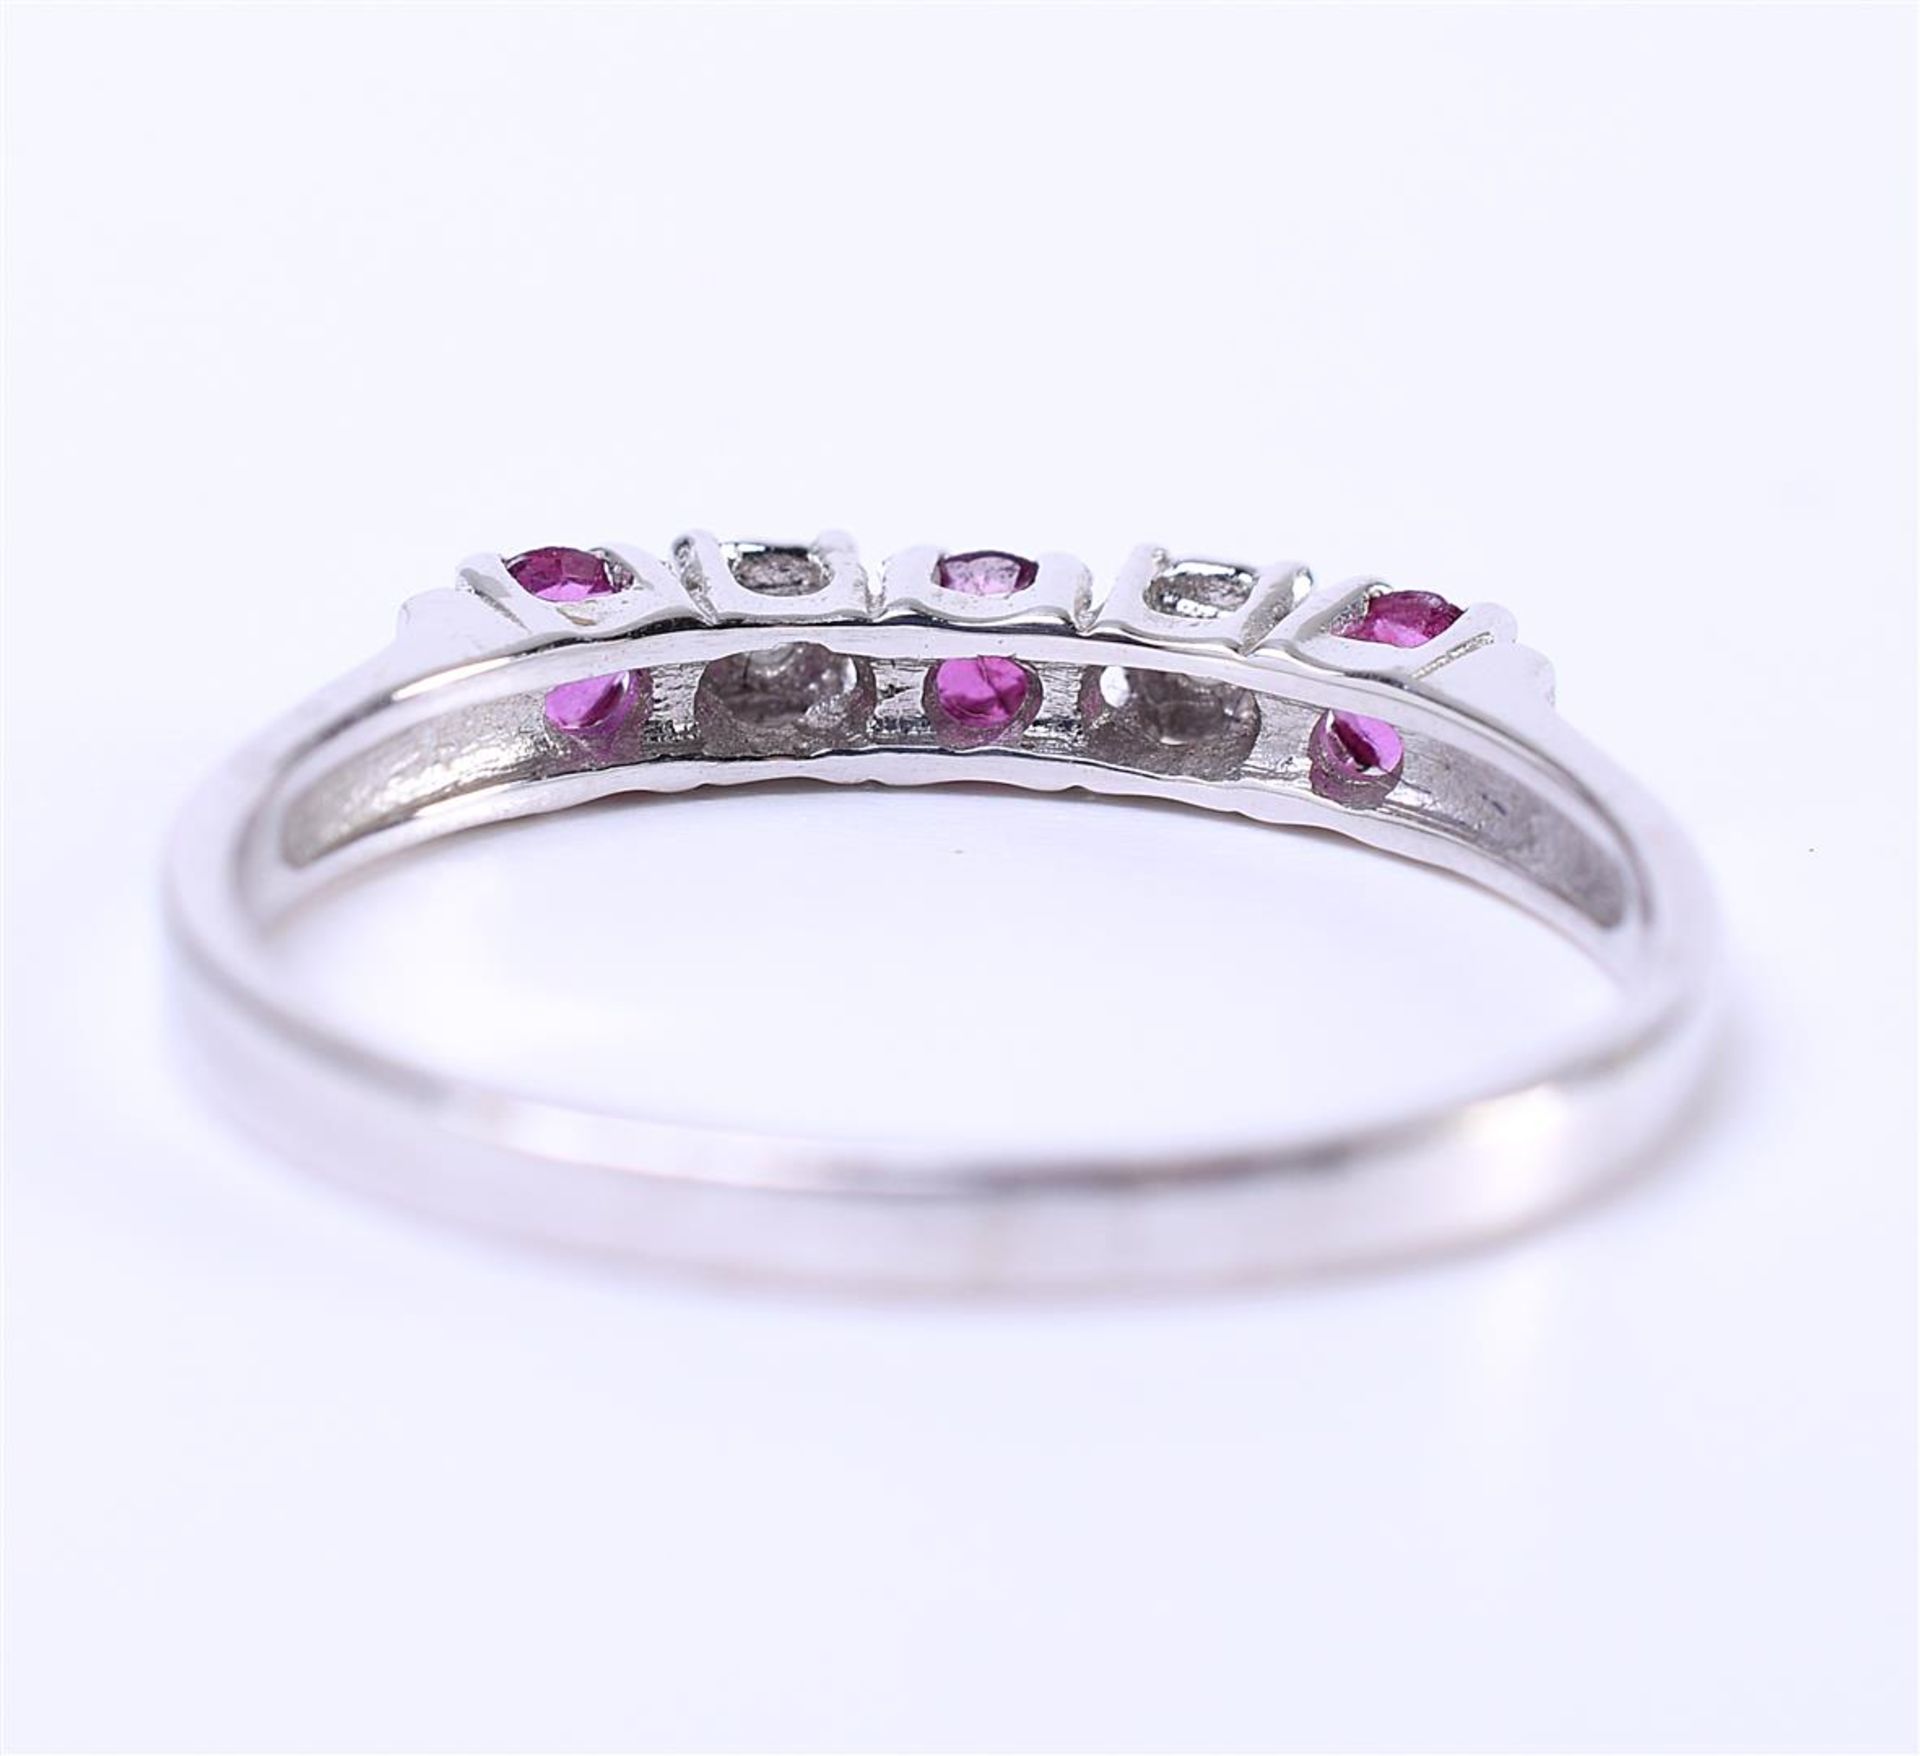 14kt white gold row ring set with ruby and diamond. Of which 2 single cut diamonds - Image 3 of 6